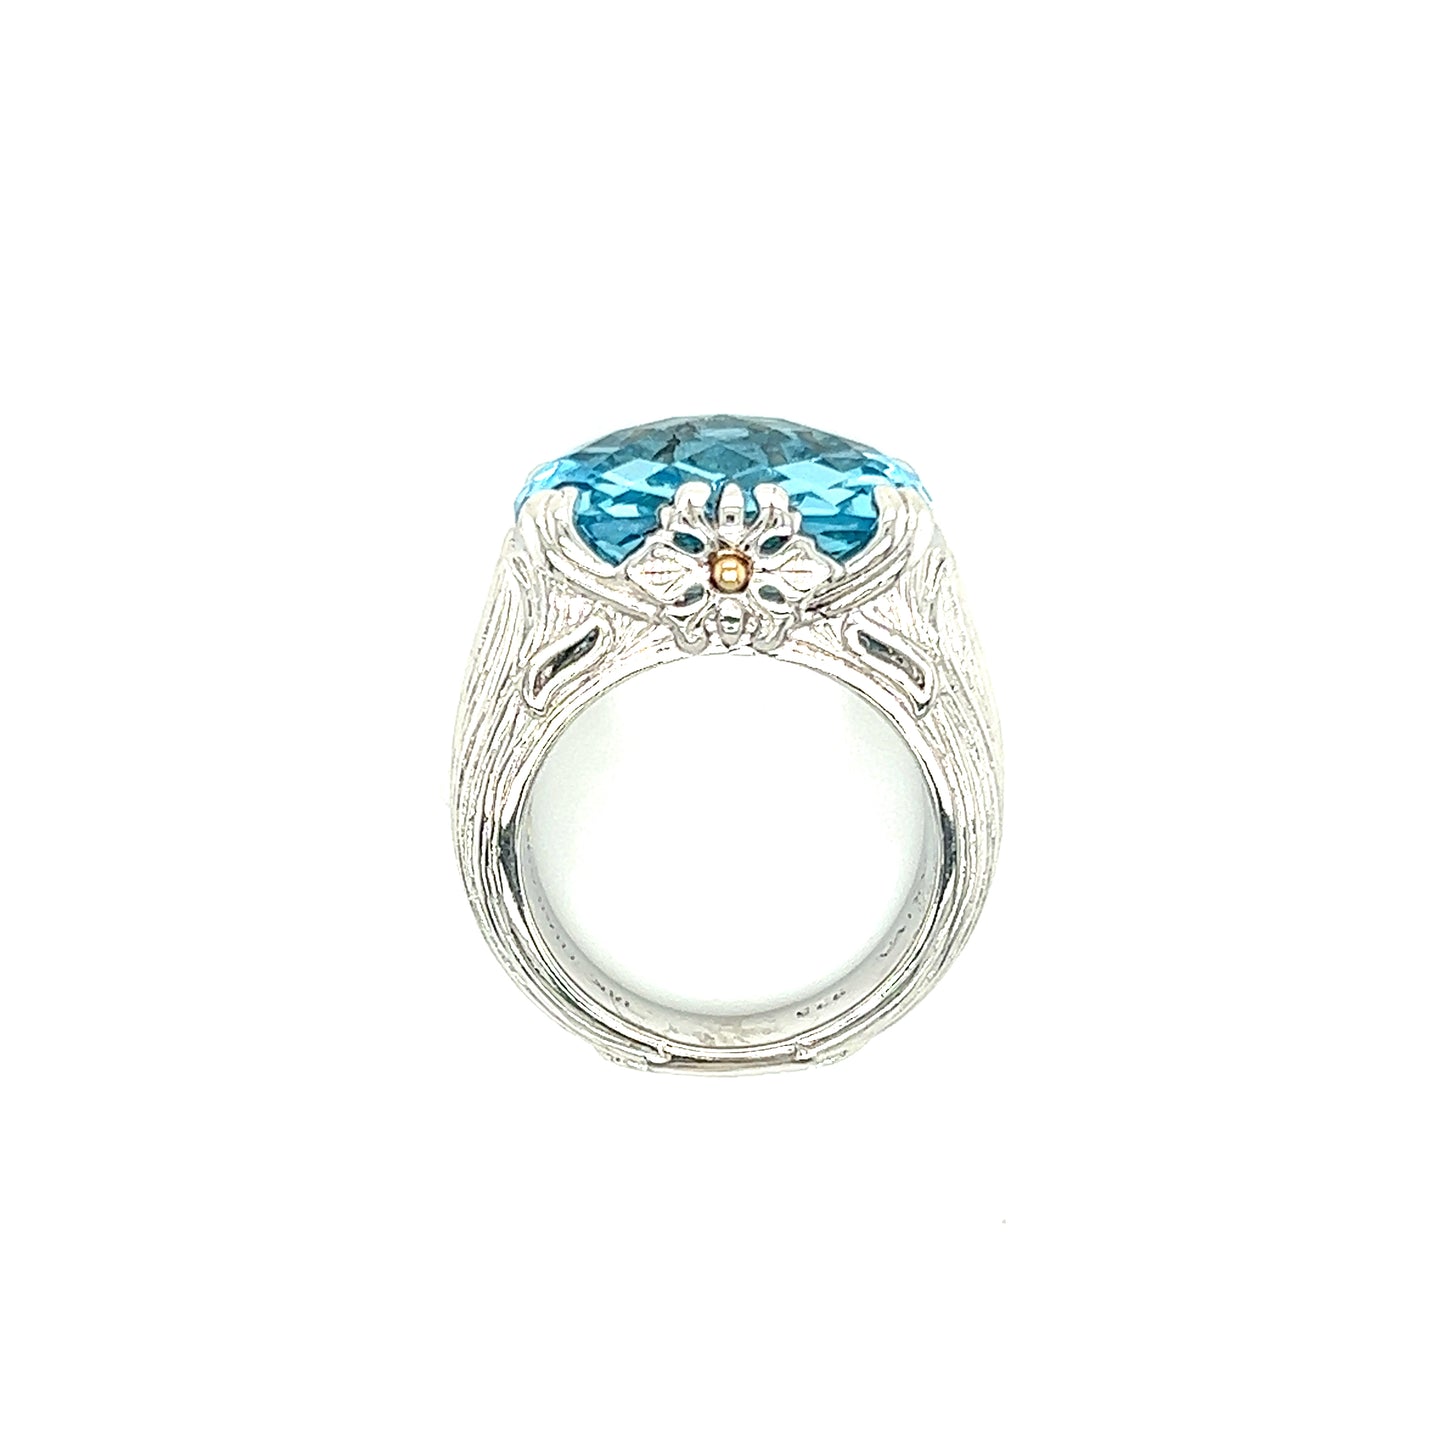 Elongated Cushion Blue Topaz Ring with 18K Yellow Gold Accents in Sterling Silver Top View